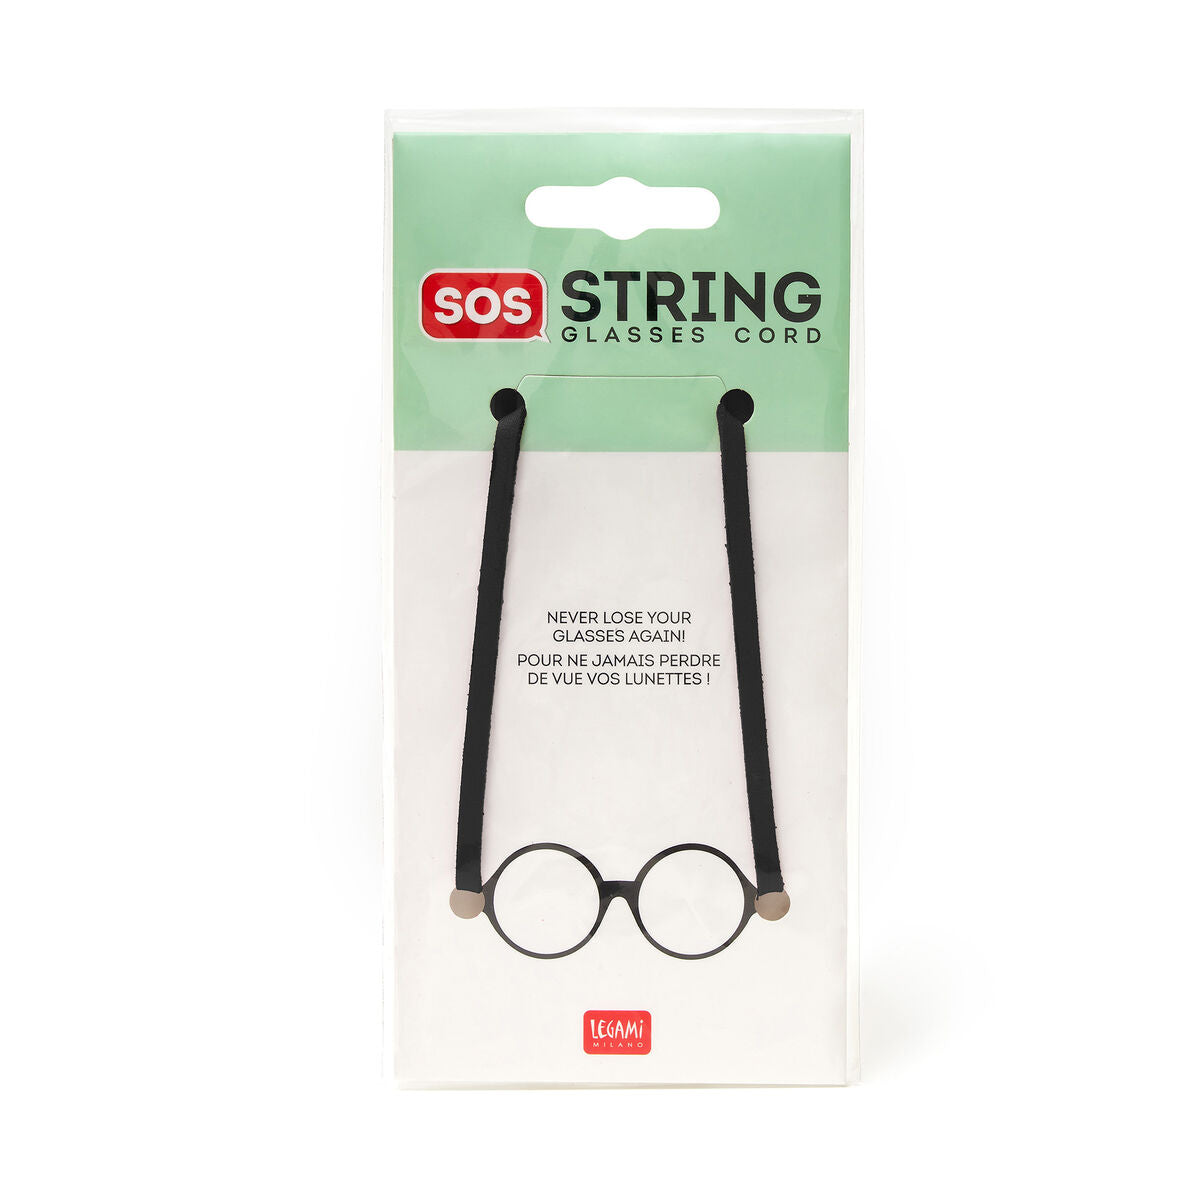 Fab Gifts | Legami SOS String Glasses Cord by Weirs of Baggot Street